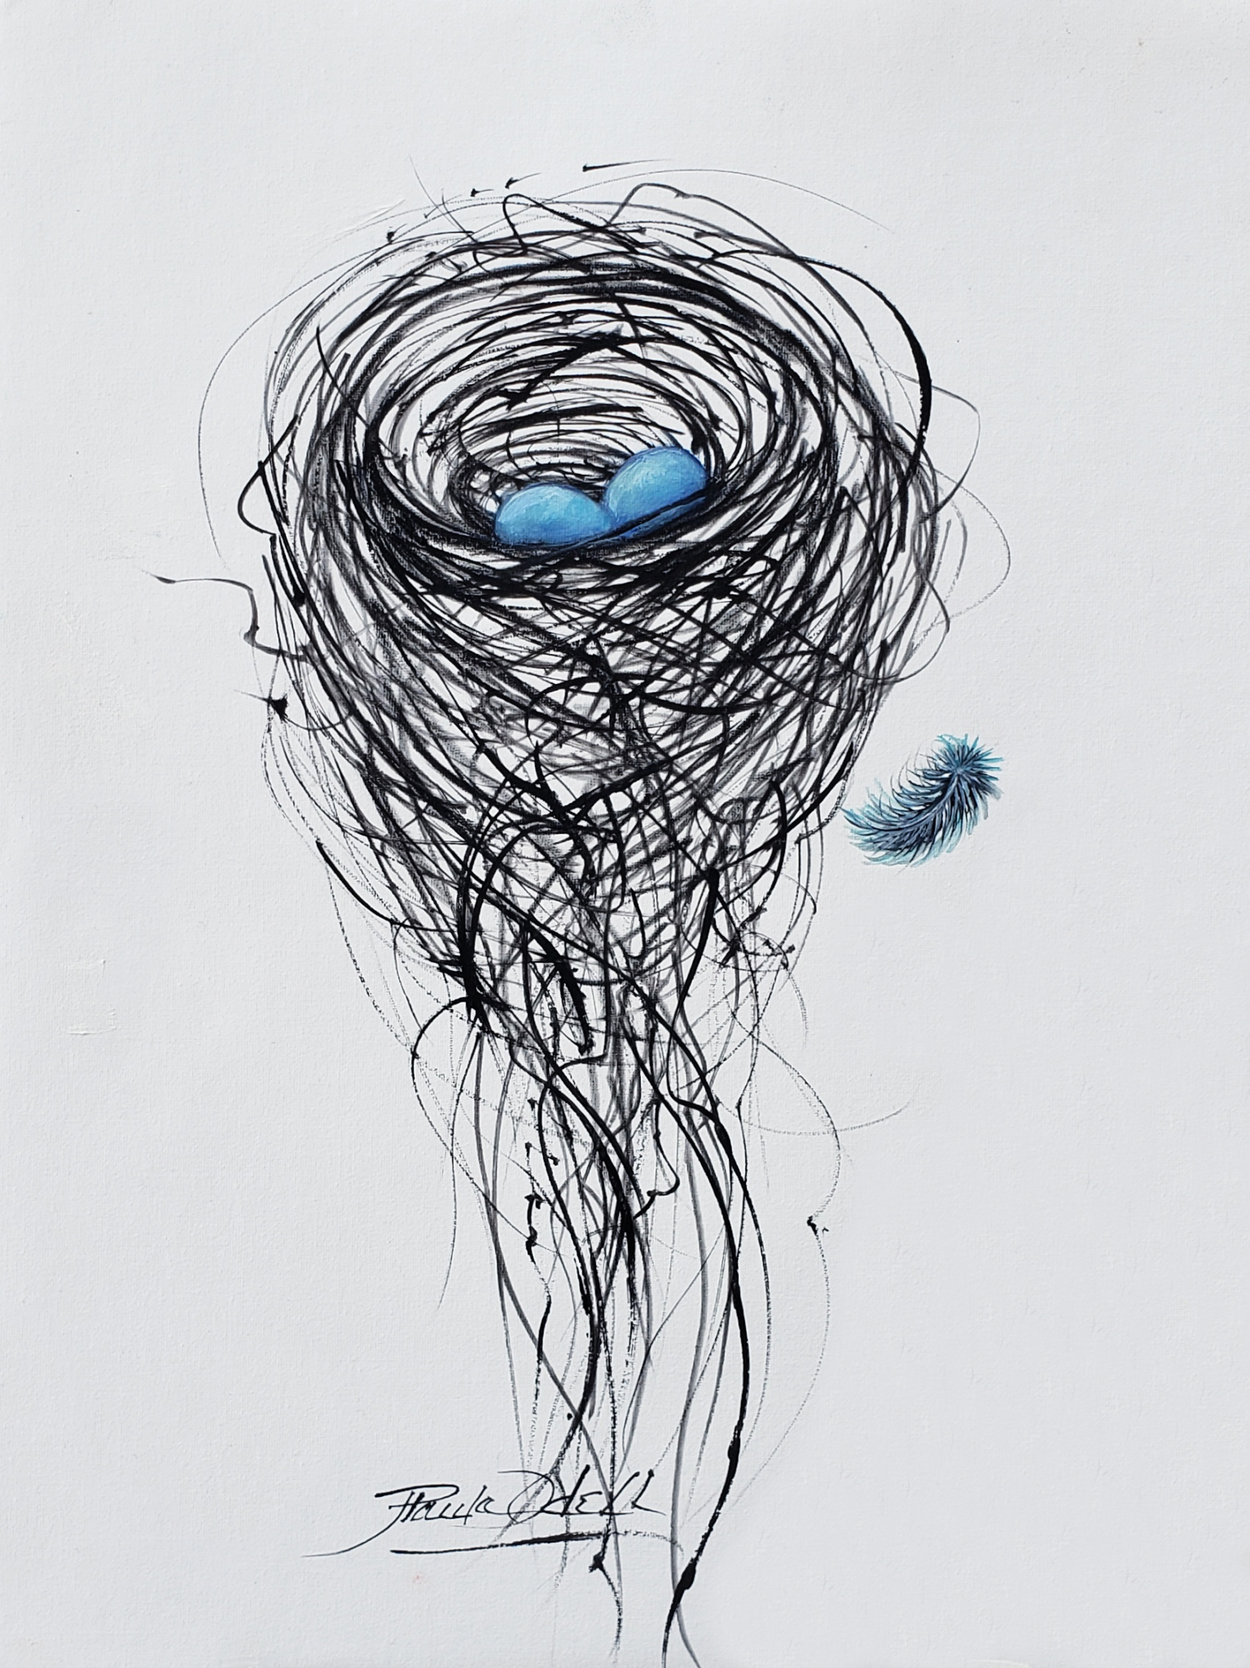 Sweet floating birds nest painted on white background. The nest has an aqua egg in it and a feather floating beside... Original oil painting on a very fine textured canvas paper. This piece comes unframed and is ready for you to choose your own special frame. Artwork is 9x12